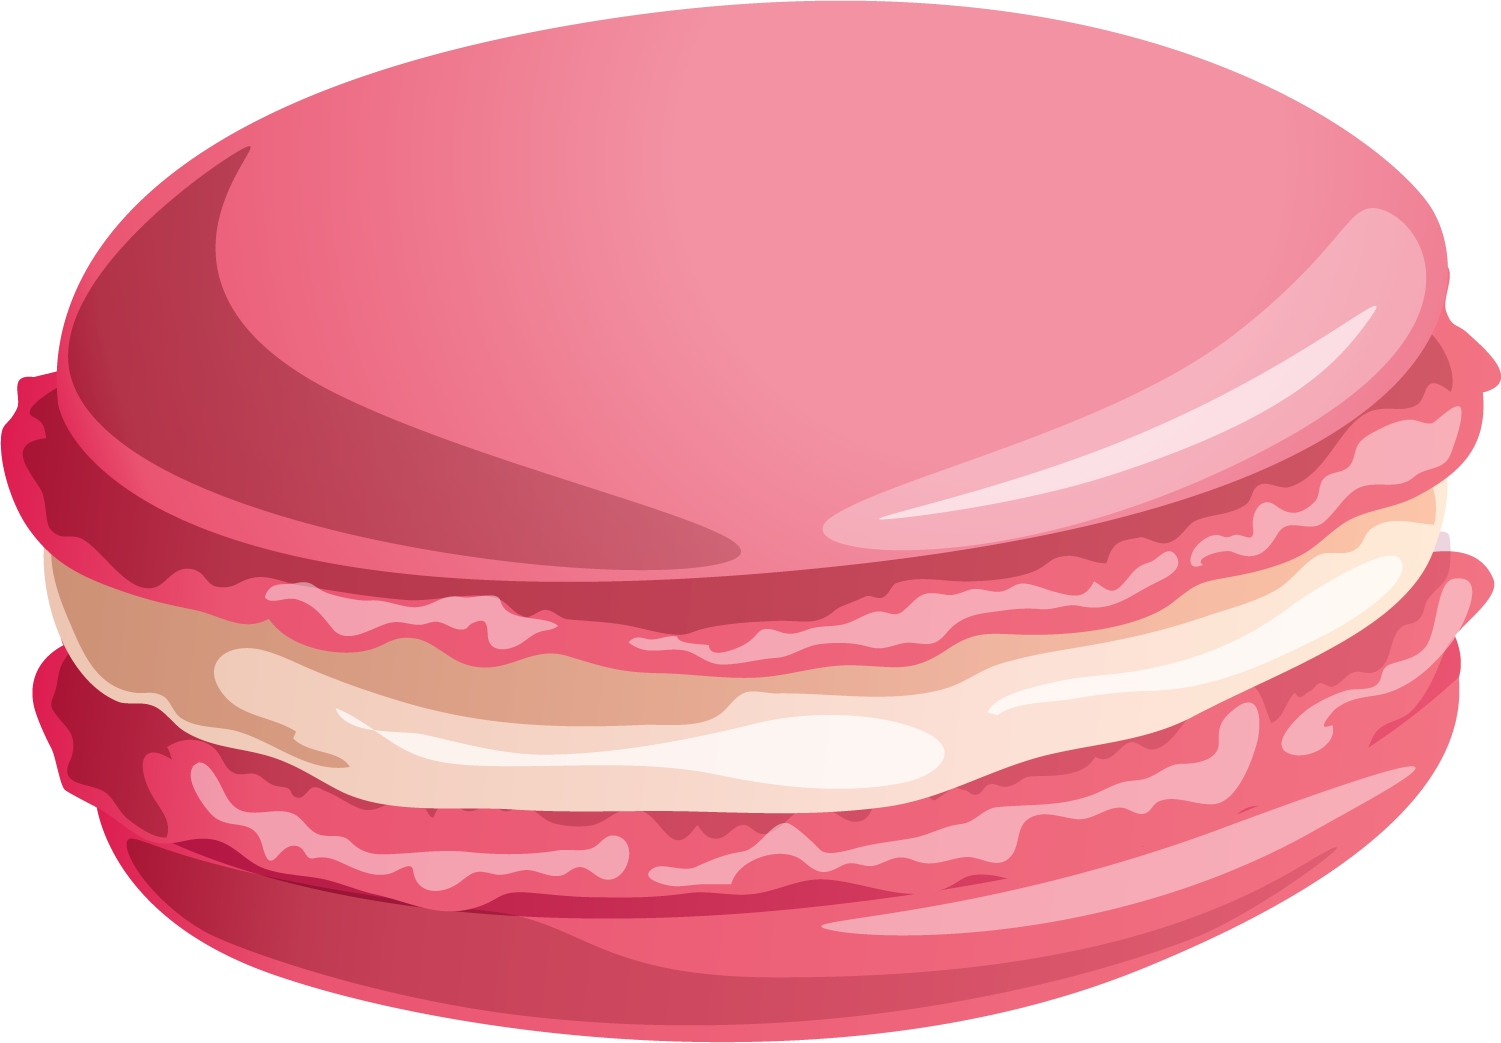 A Pink Macaroon With White Cream